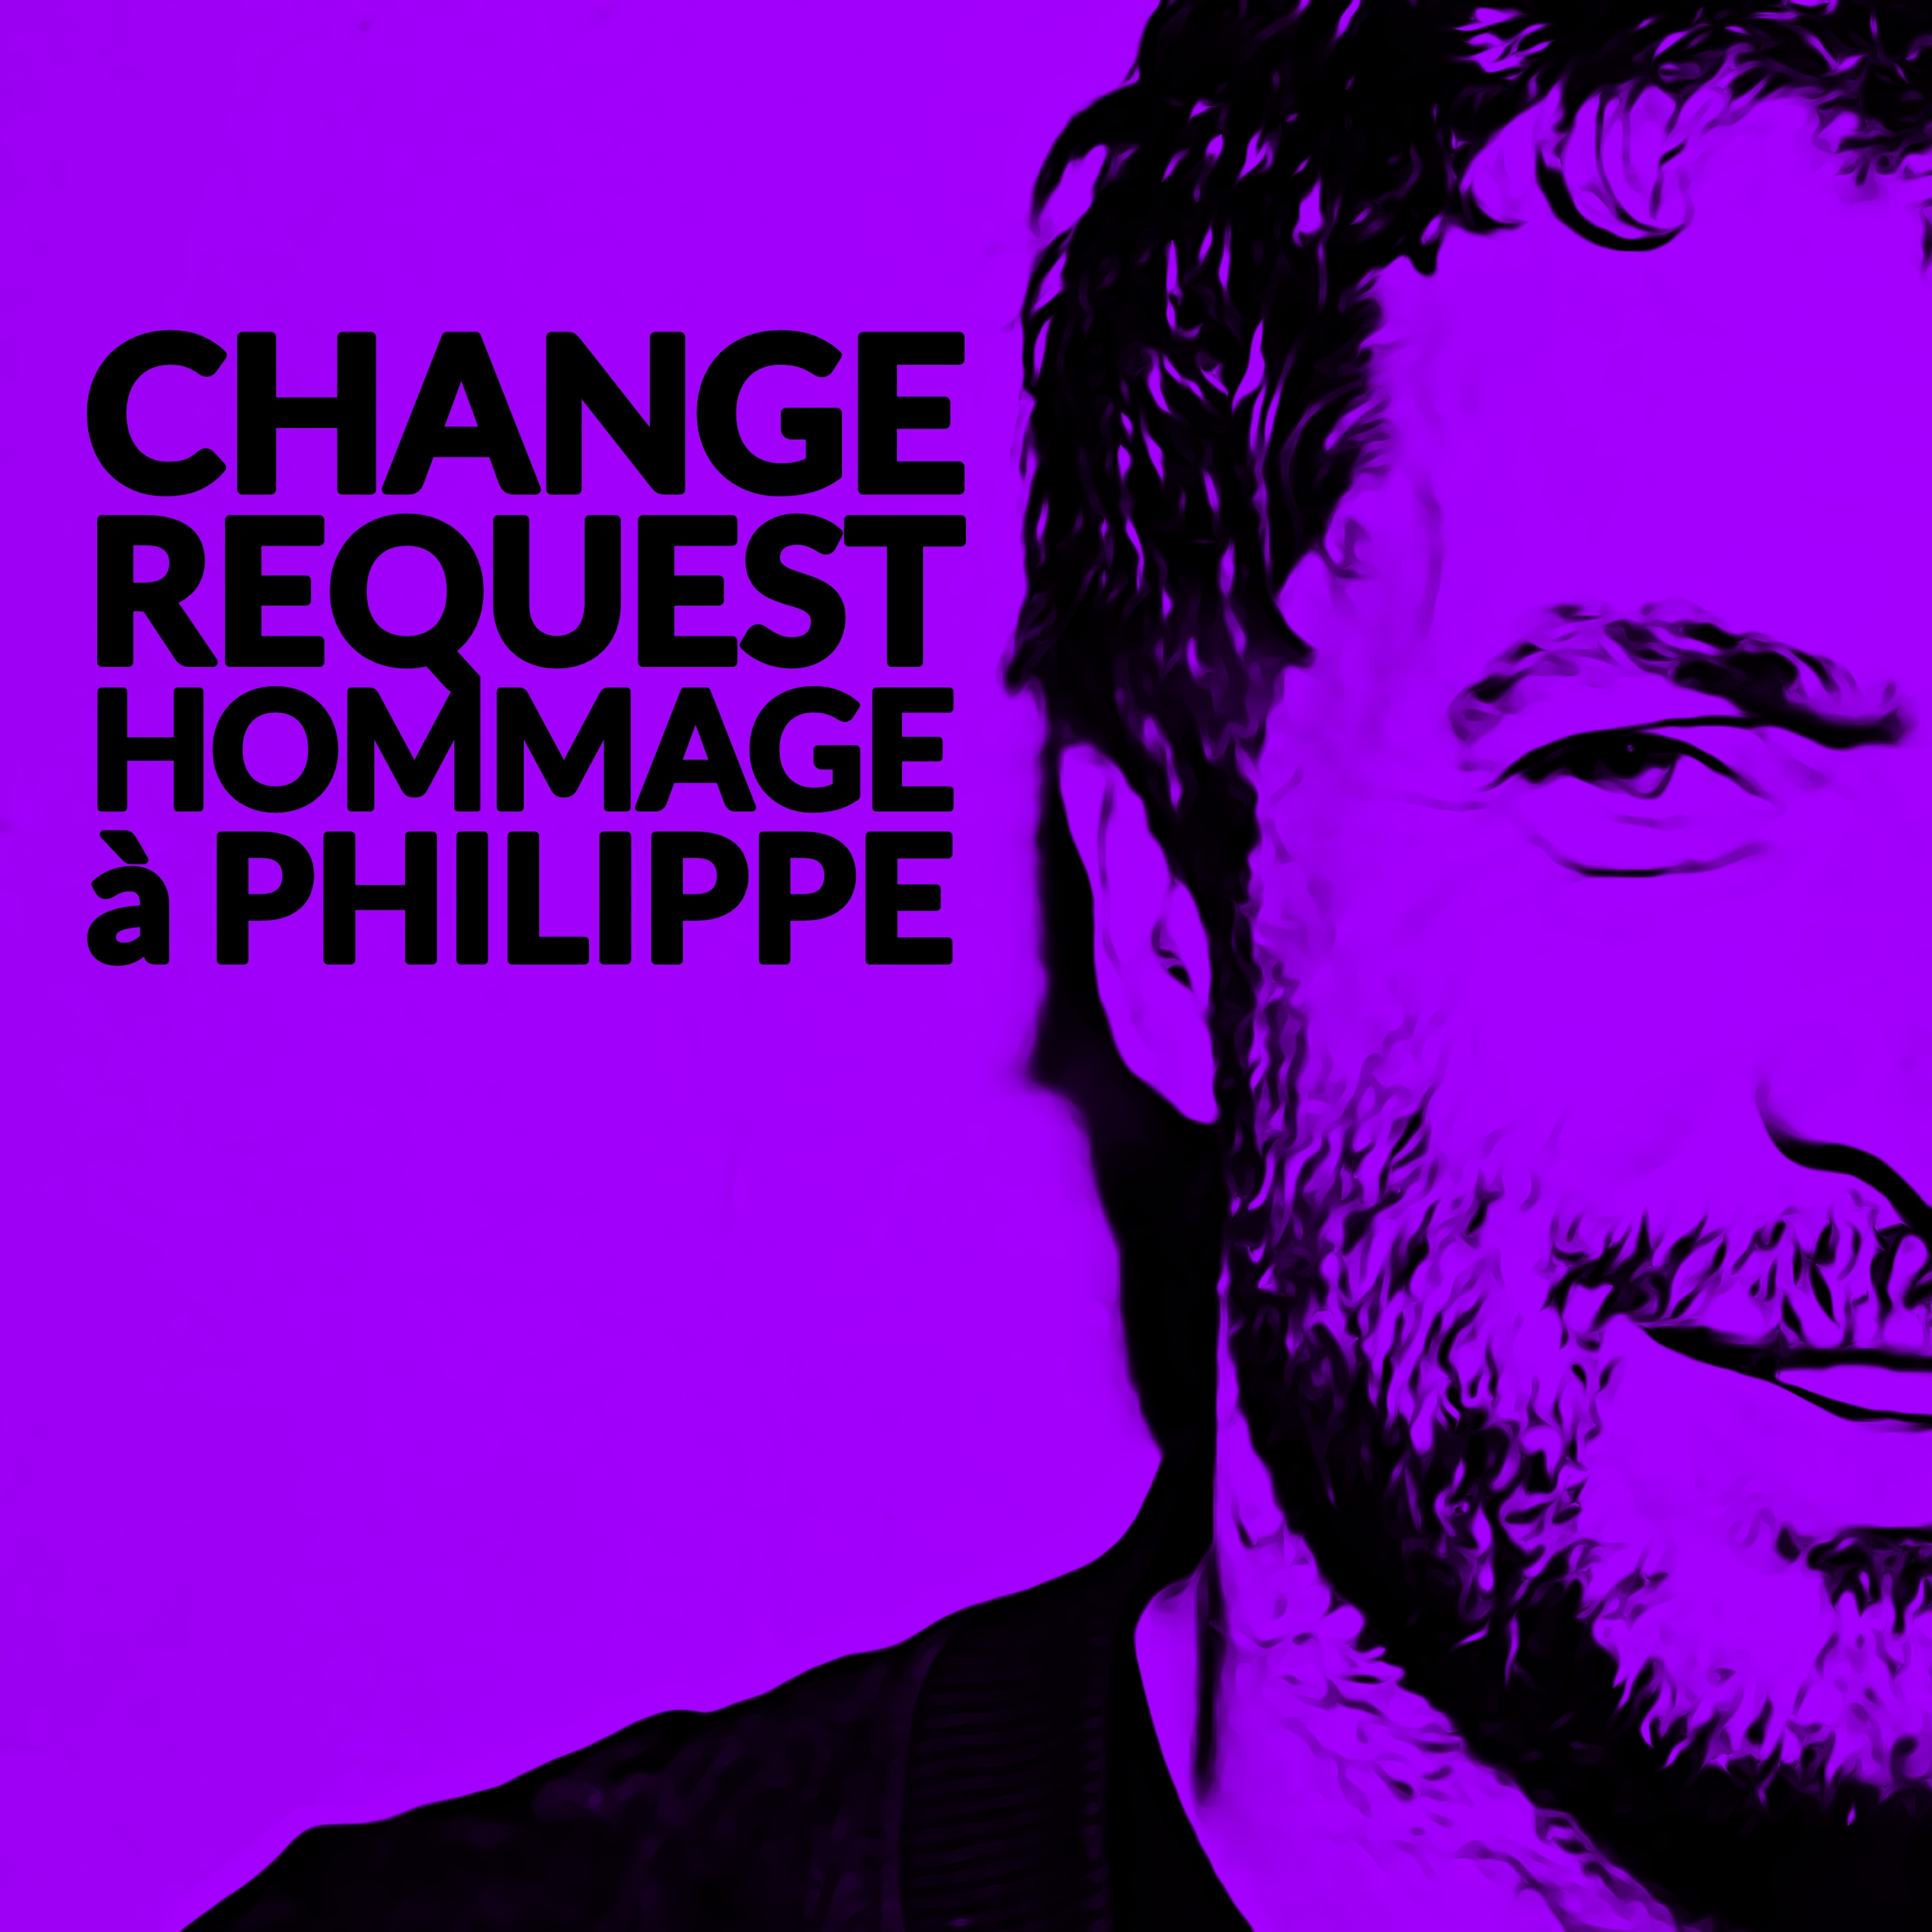 Hommage à Philippe